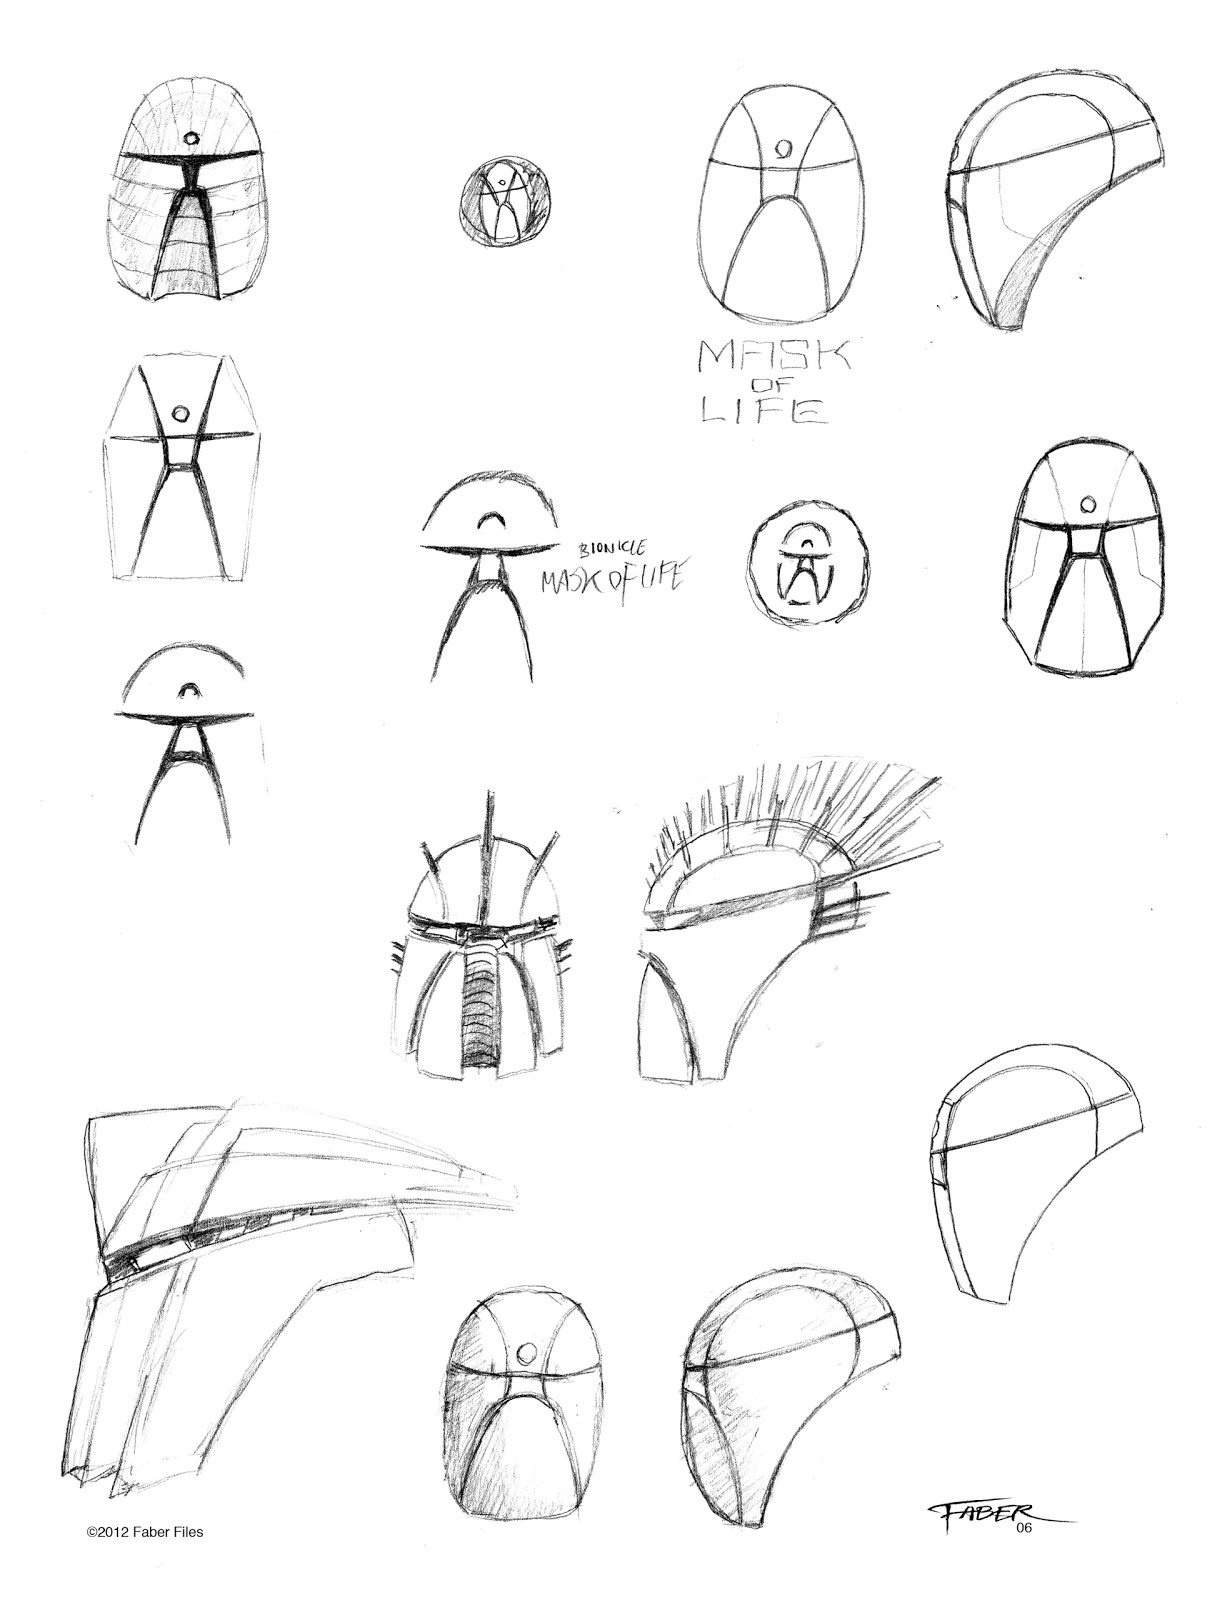 Bionicle Concept Arts - Página 2 Christian+Faber+Files_MOL+early+sketches